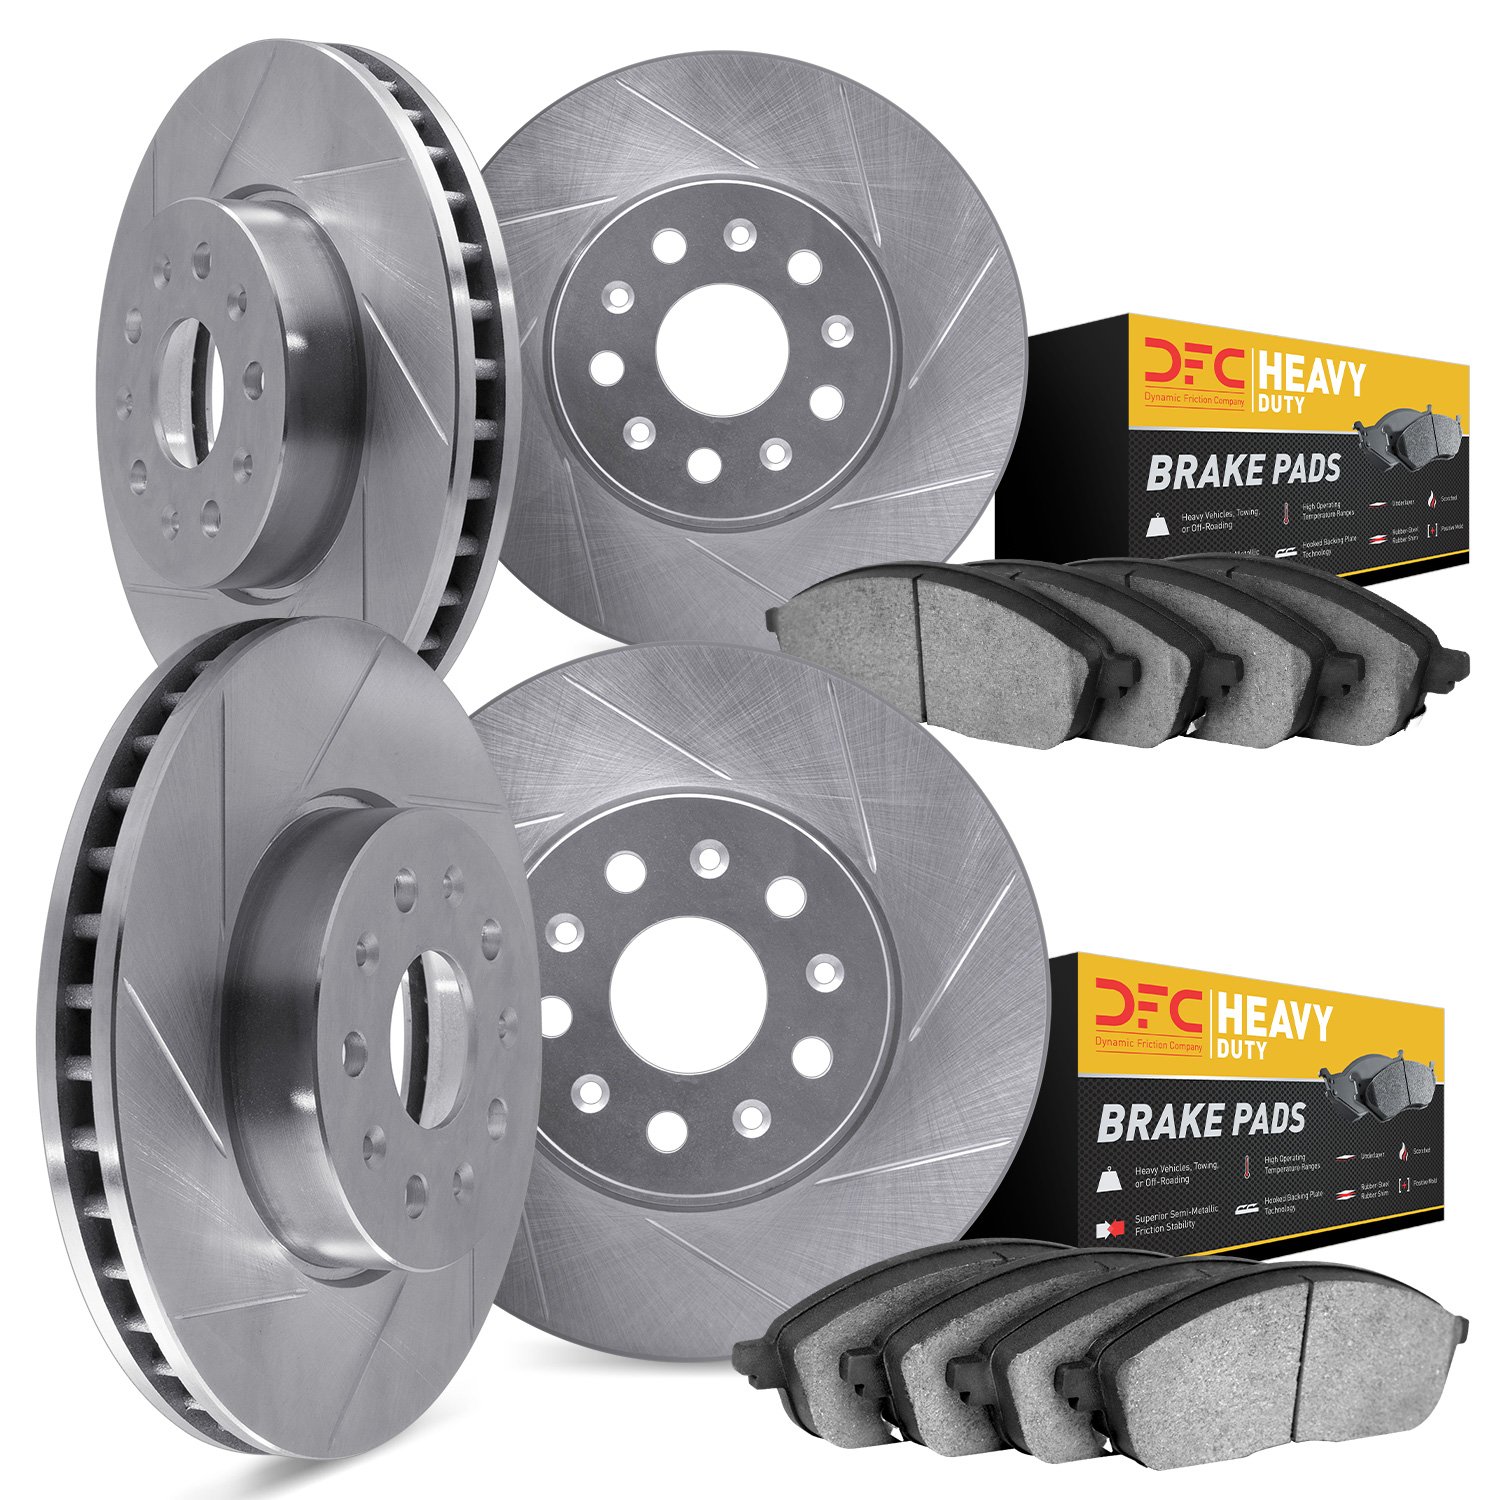 5204-40227 Slotted Brake Rotors w/Heavy-Duty Brake Pads Kits [Silver], 2003-2003 Mopar, Position: Front and Rear